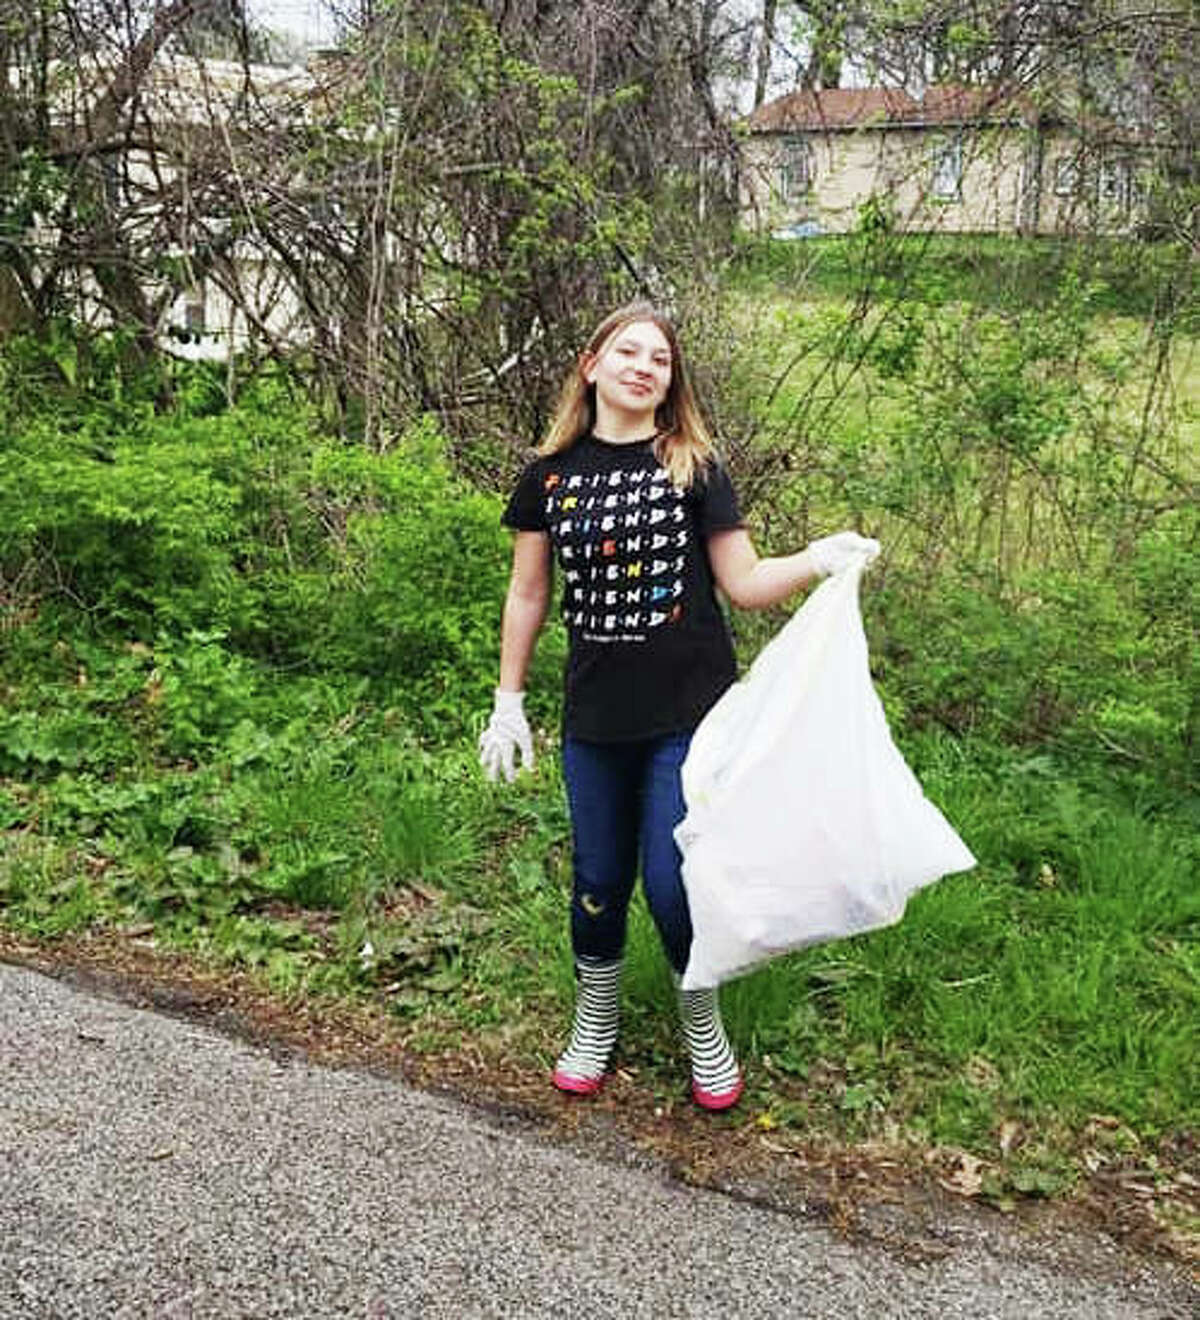 Megan Van Deusen, a founding member of the public Facebook group RiverbendTrashTagChallenge, proudly shows a bag of trash collected in Alton. The group was formed in lieu of the cancelled Alton City Wide Clean Up, originally scheduled for April 25.